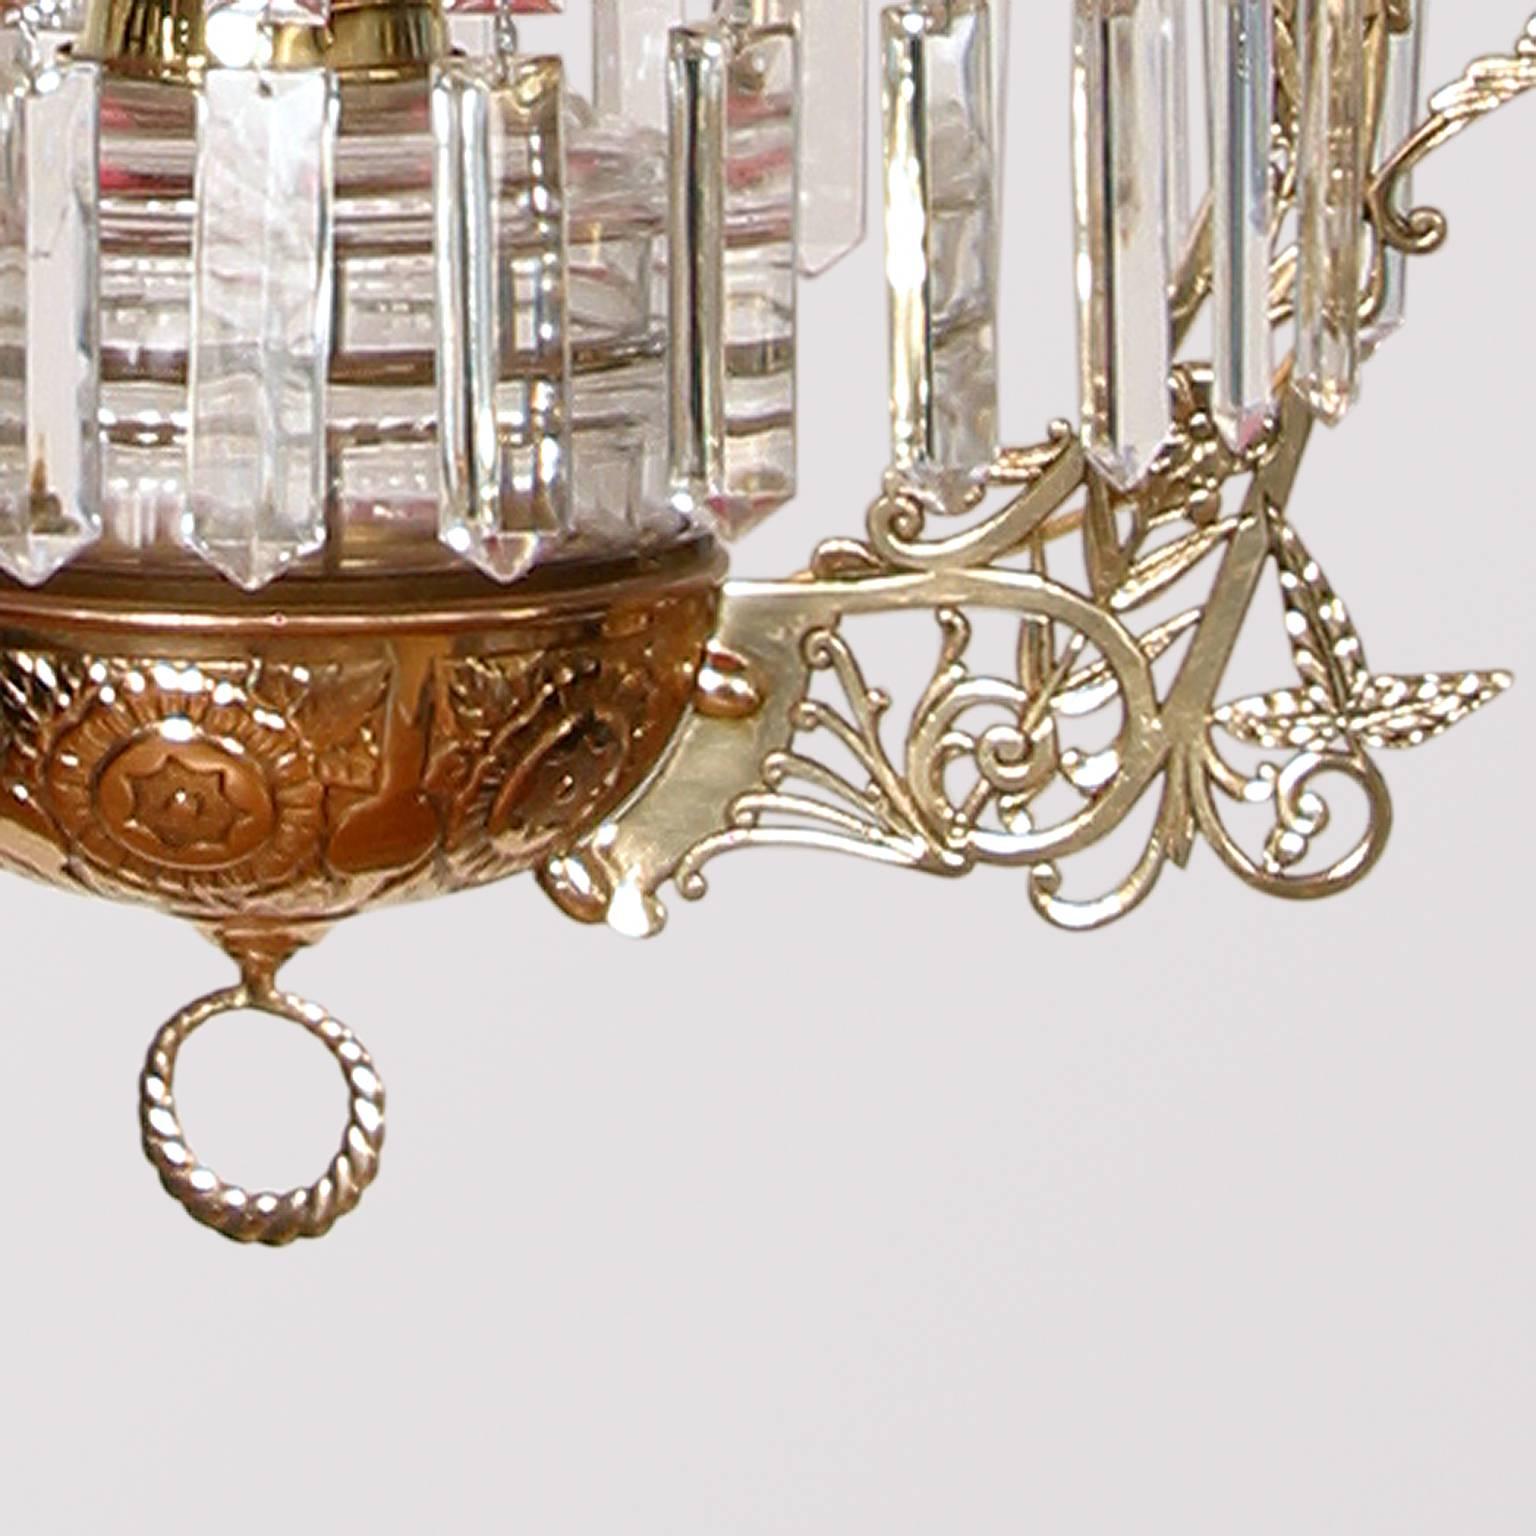 English Victorian Parlor Lamp with Cranbury Hobnail Shade For Sale